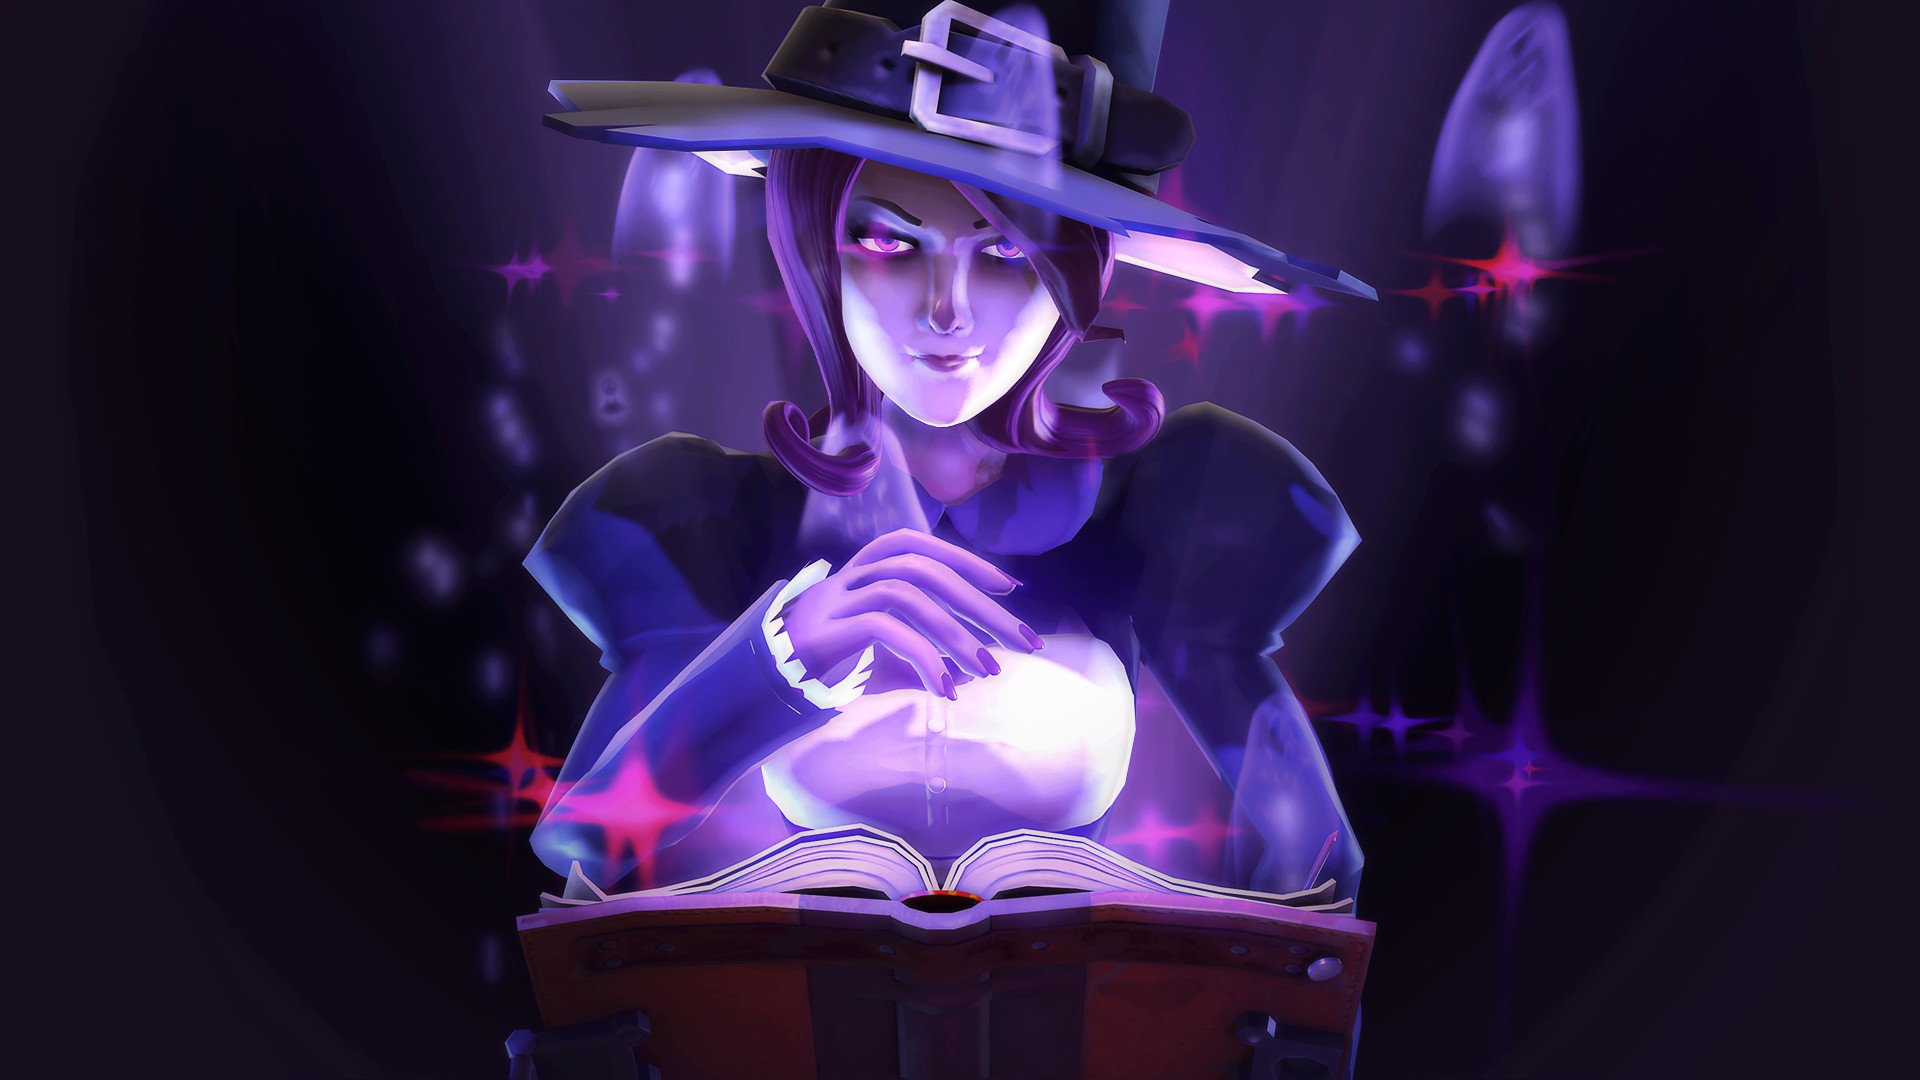 Tf2 Papercraft Made An Sfm Poster Of the Cover Model Witch From the Spellbook